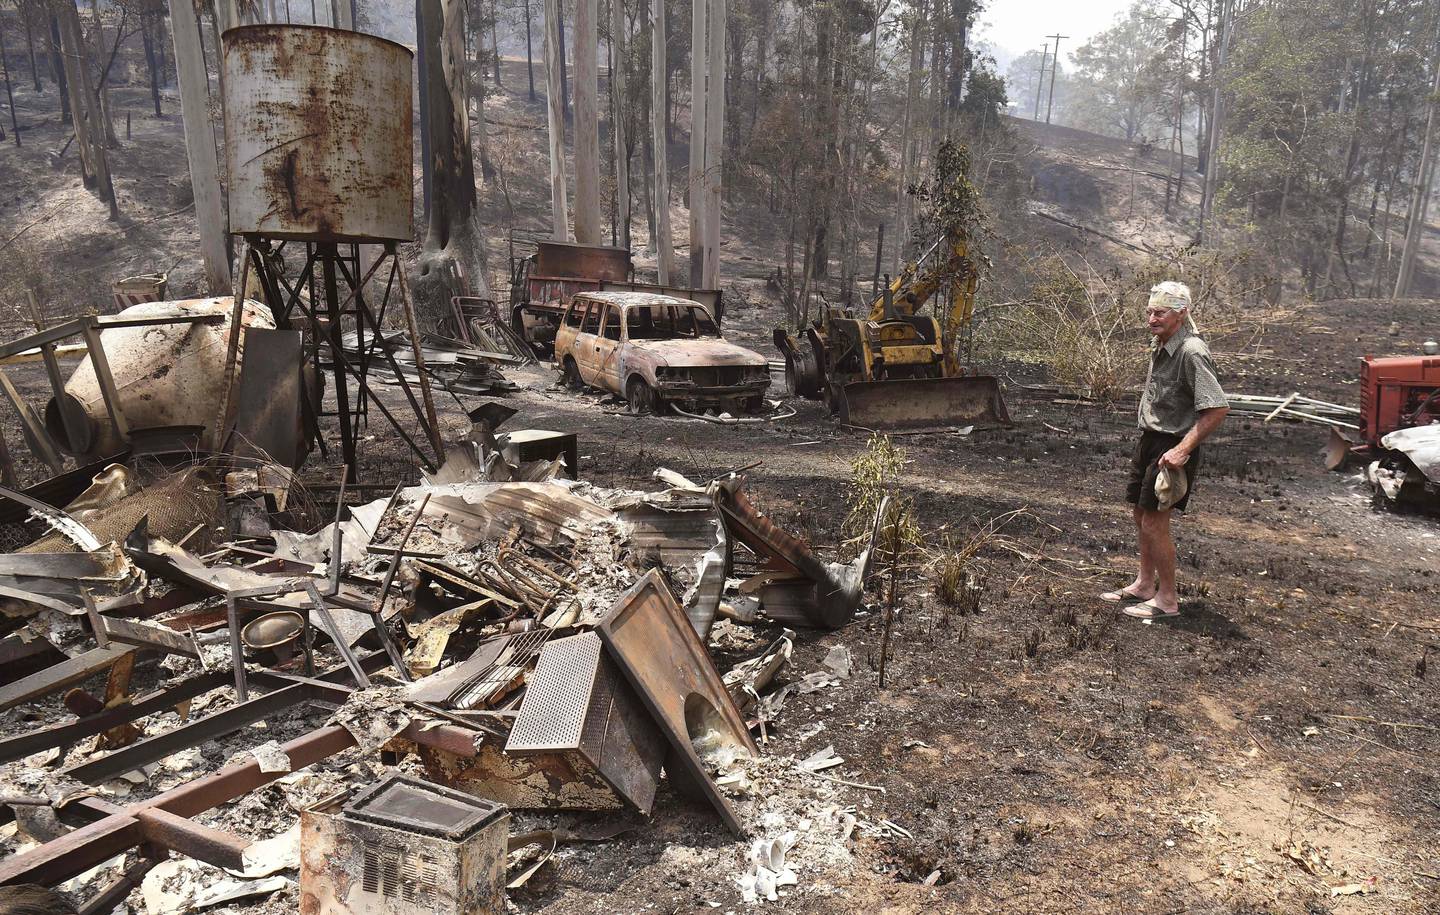 TOPSHOT - Rick Wright inspects the damage next to his house at Nabiac, some 350kms north of Sydney, on November 14, 2019. - The death toll from devastating bushfires in eastern Australia has risen to four after a man's body was discovered in a scorched area of bushland, police said on November 14. (Photo by WILLIAM WEST / AFP)